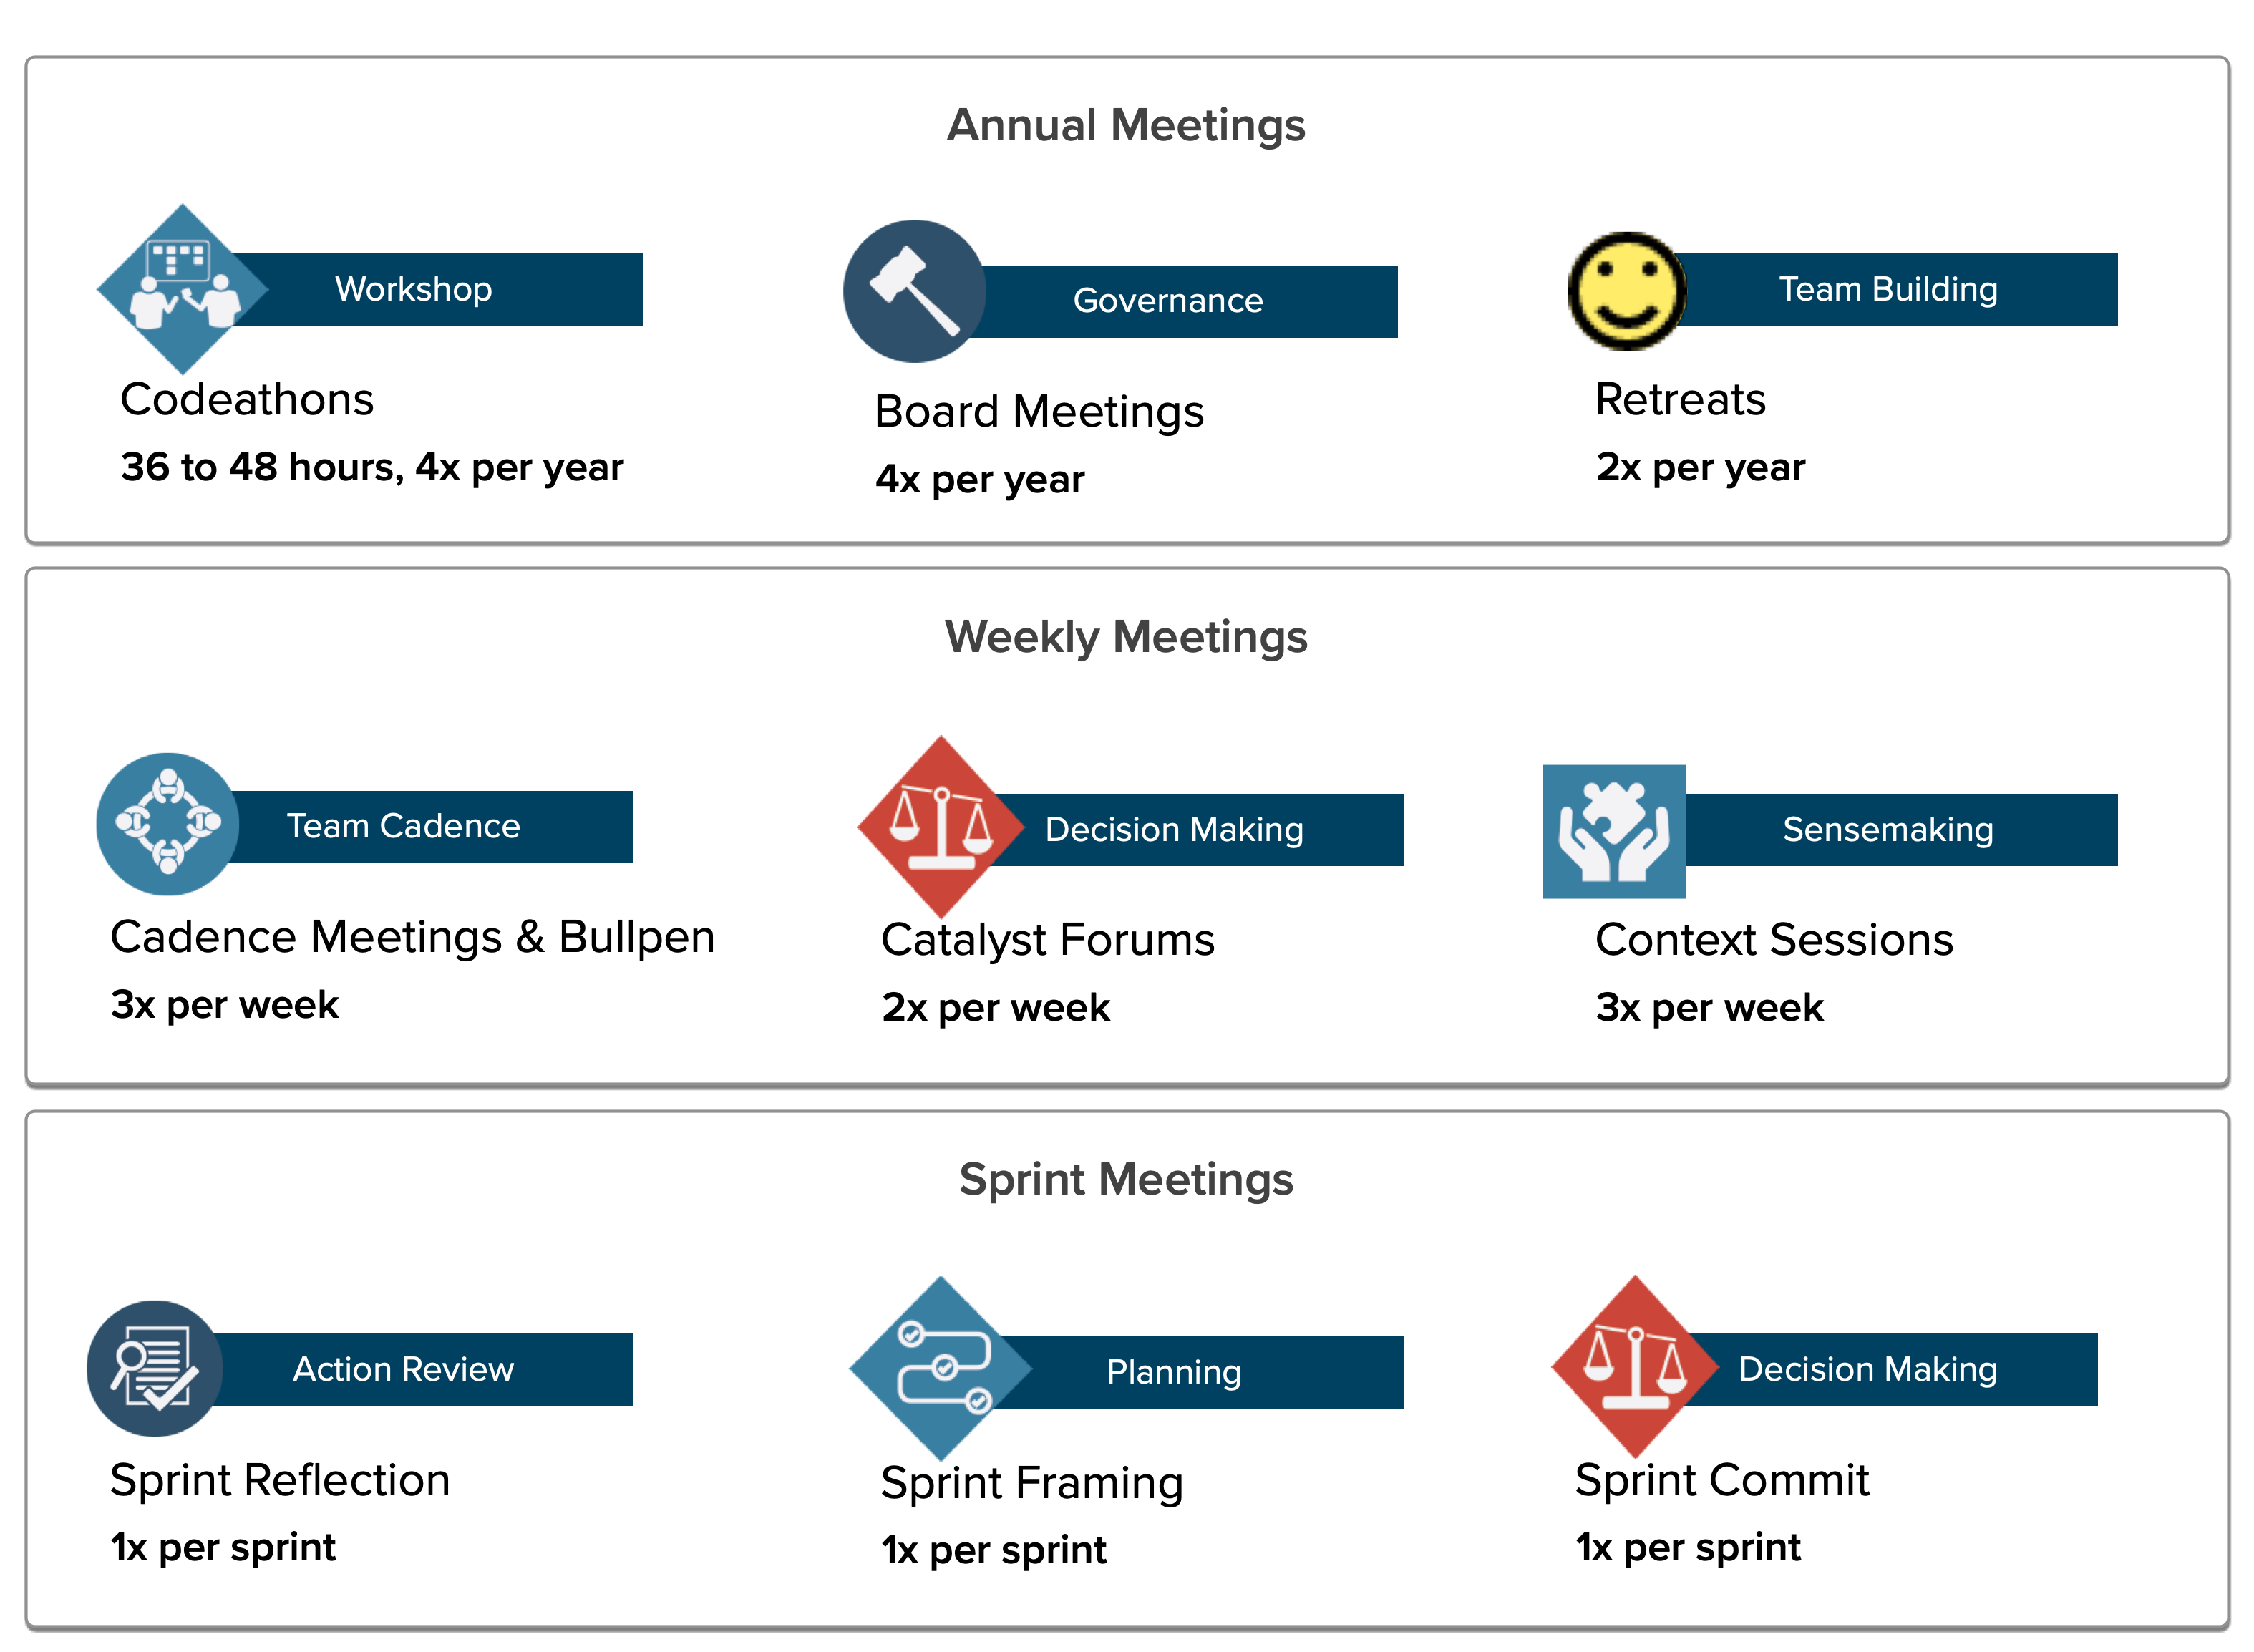 Annual: Codathons, Board meetings, retreats. Weekly: Cadence & Bullpen meetings, Catalyst forums, Context sessions; Per Sprint: reflection, framing, commit